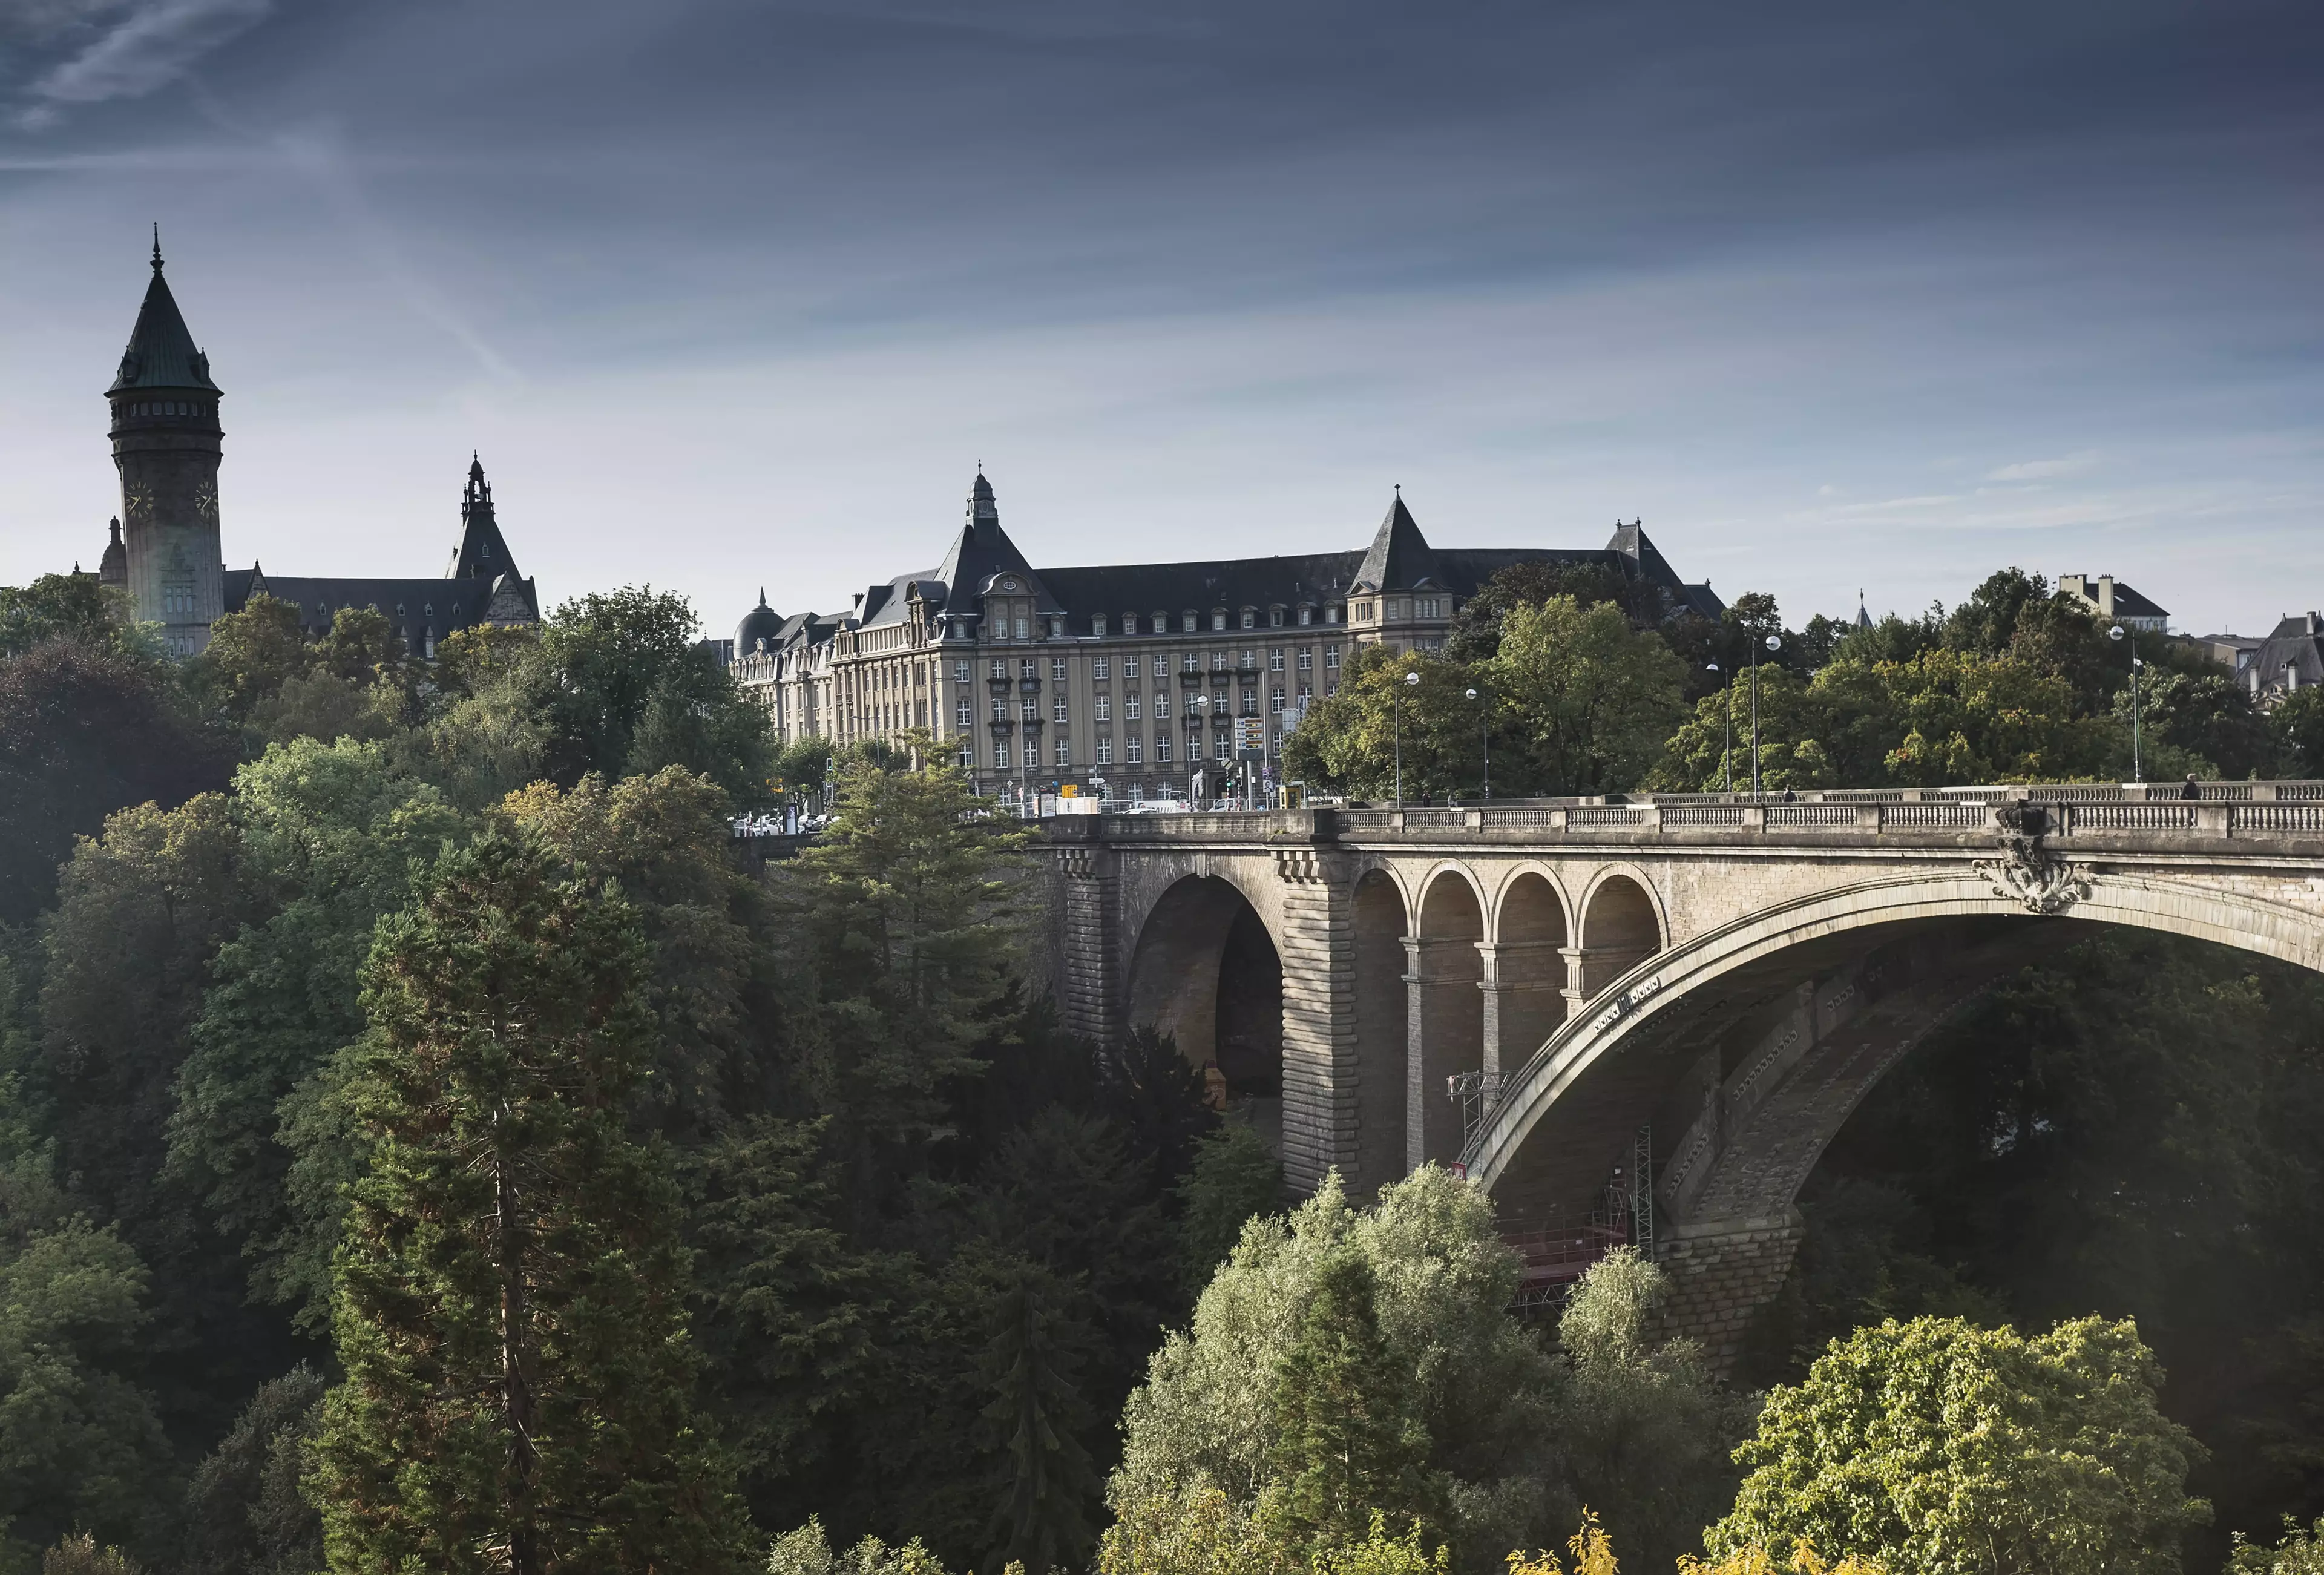 Luxembourg is now the first country offering free travel.